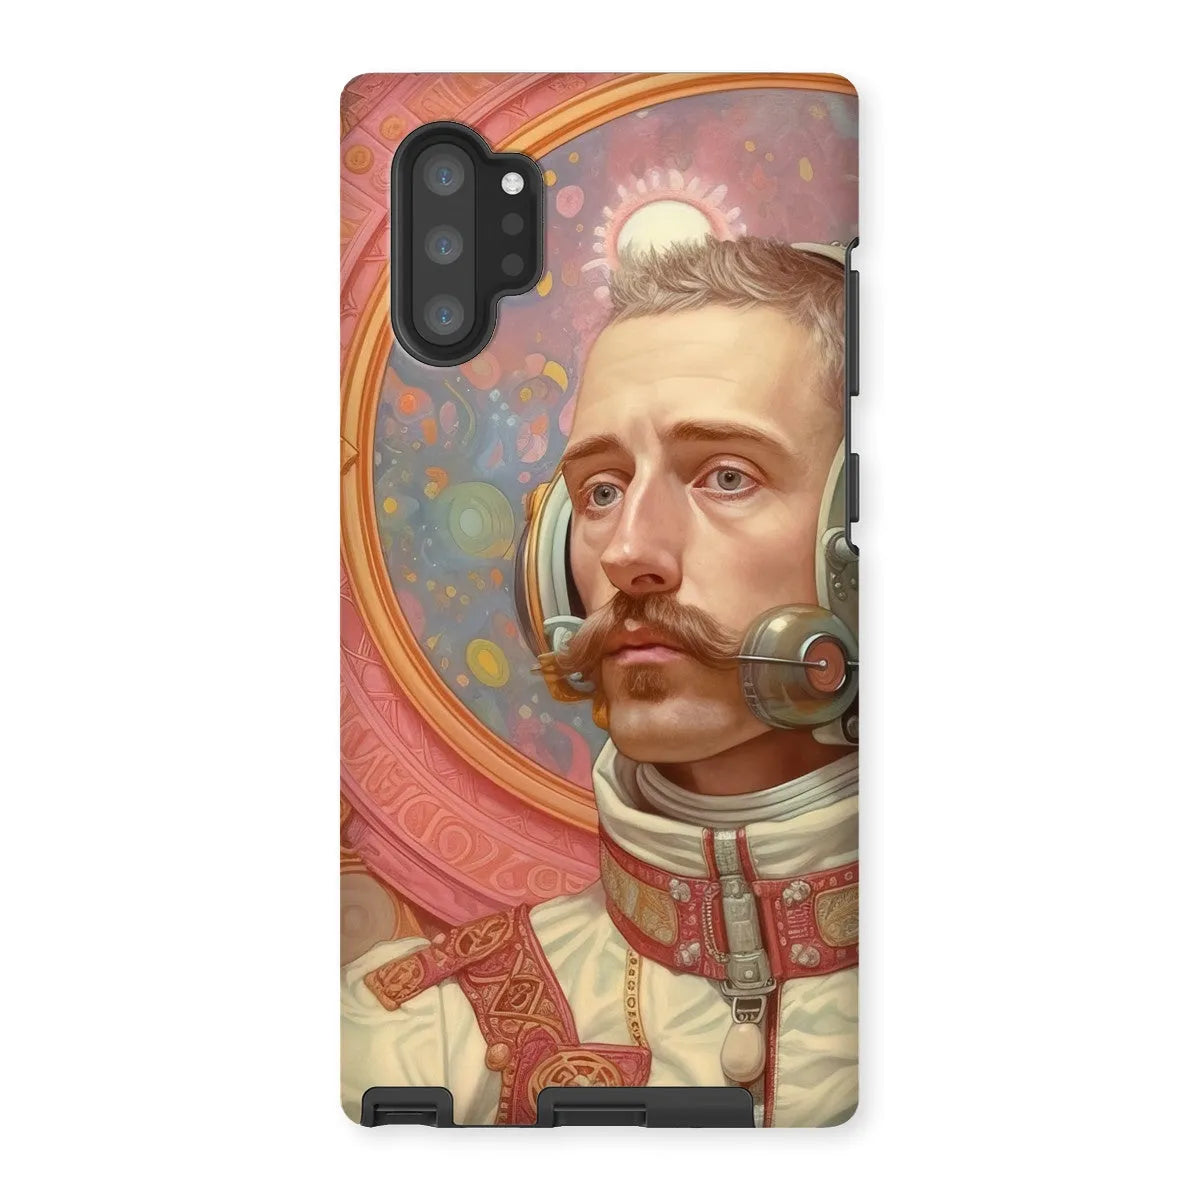 Axel The Gay Astronaut - Gay Aesthetic Art Phone Case - Samsung Galaxy Note 10p / Matte - Mobile Phone Cases